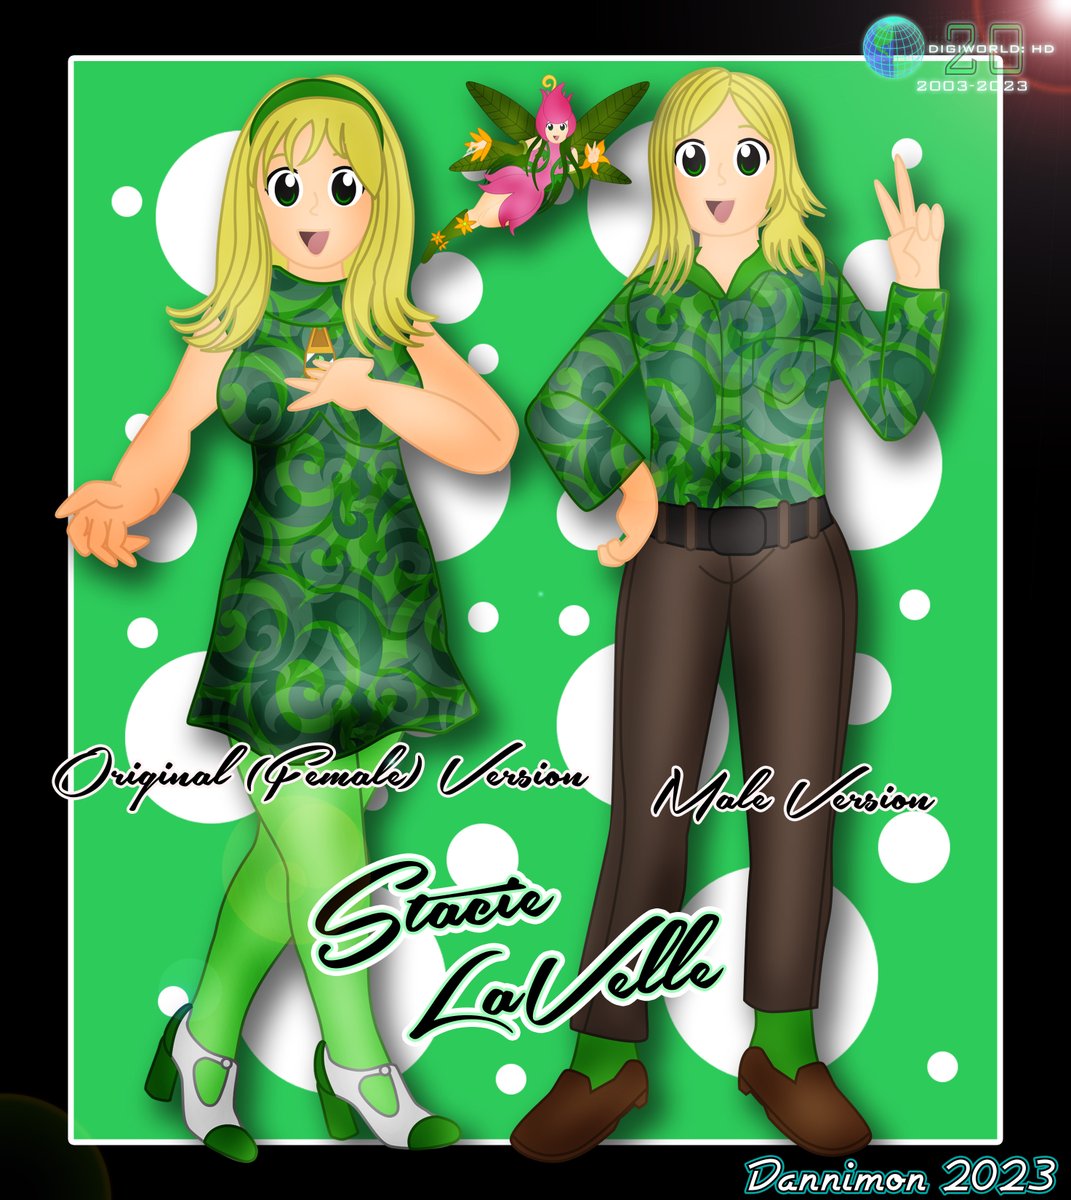 And finally Stacie LaVelle who also loves the color green and vintage fashion it was easy coming up with a male style so its only fitting the male version would reflect that. #digimon #digiworldhd #dannimondesigns #modstyle #fashiondesigner